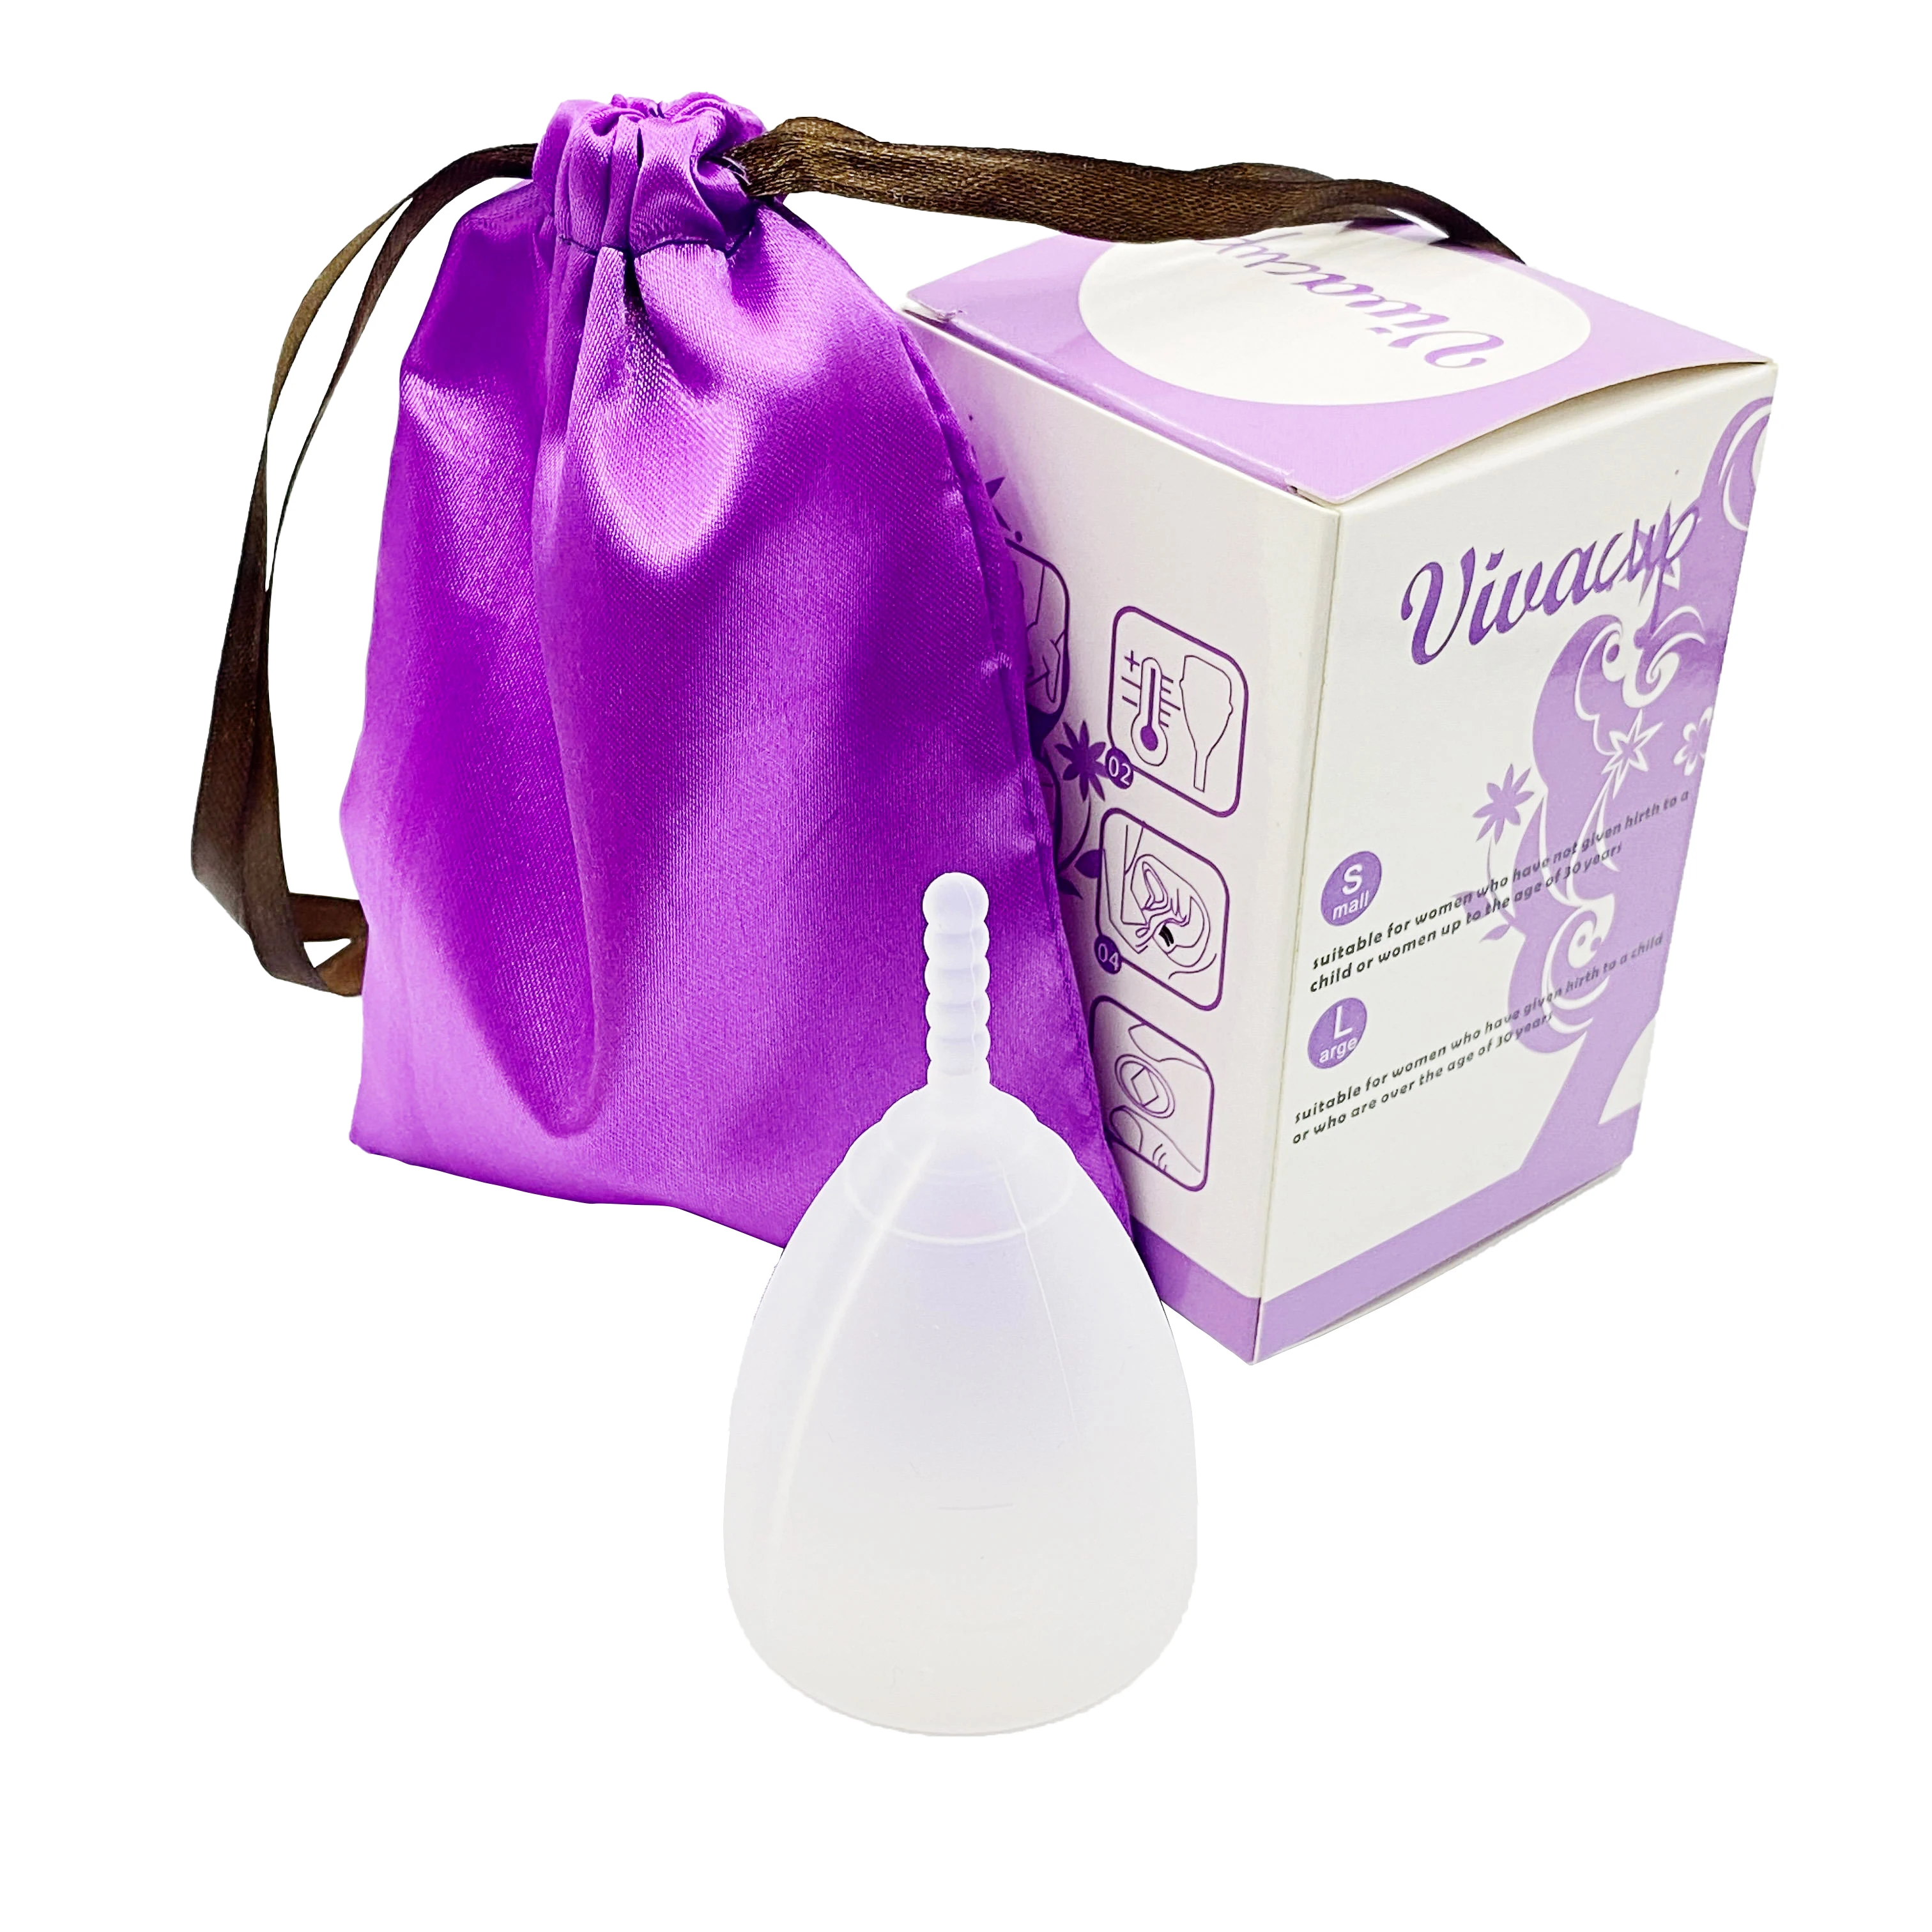 Oem 100soft Medical Silicone Menstrual Cups With Reusable Lady Menstruation Cups Buy Silicone 5458